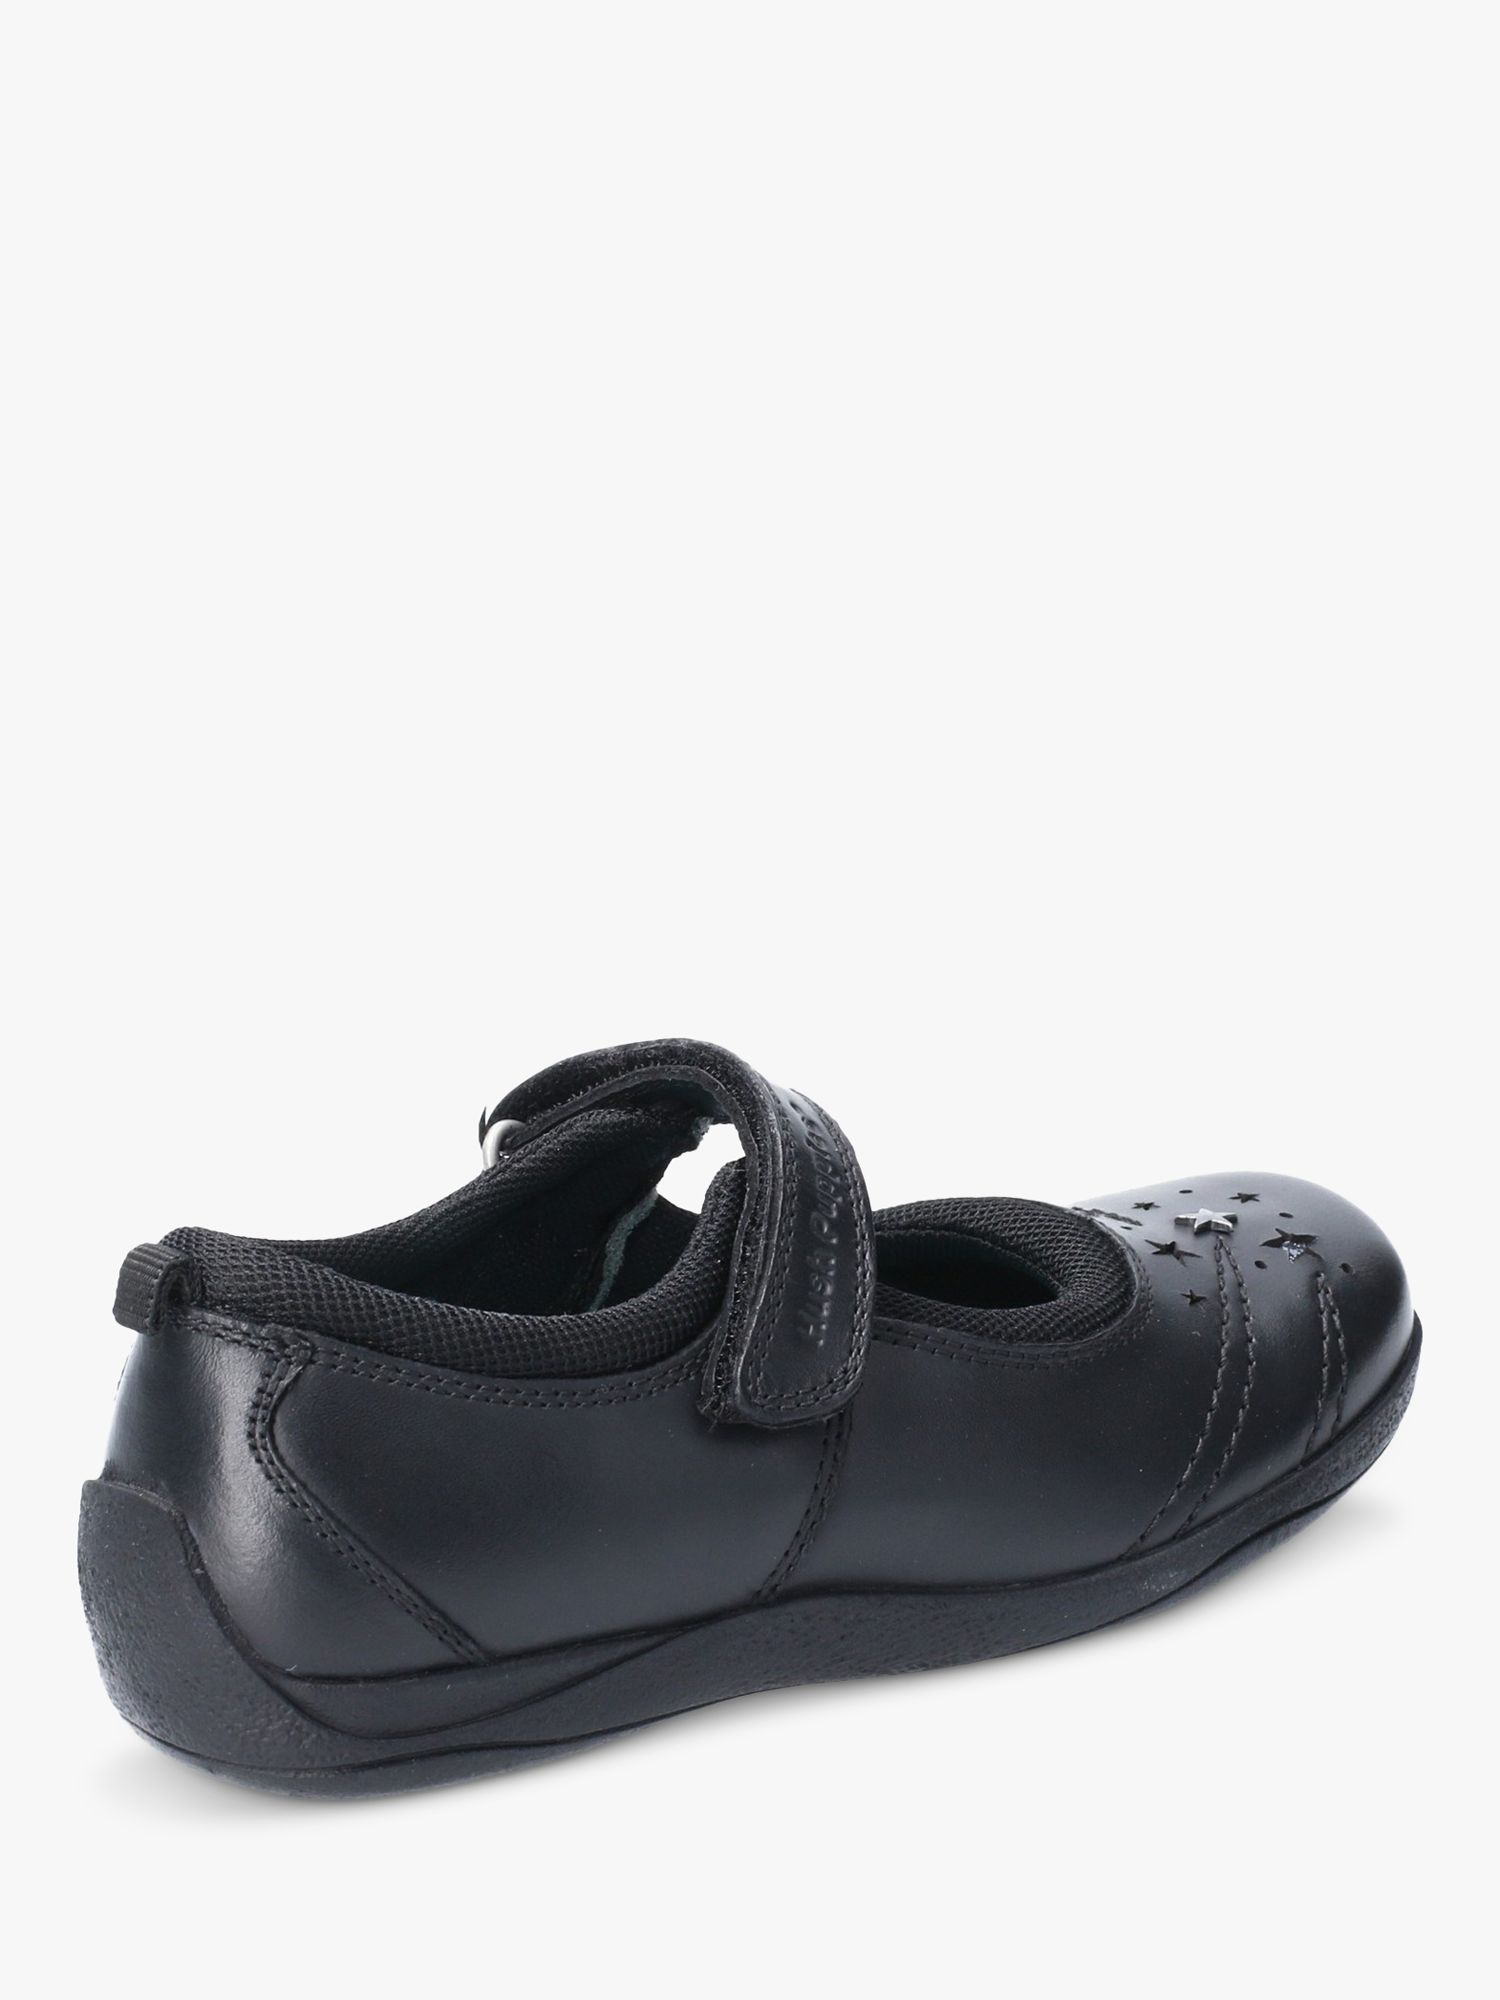 Hush Puppies Kids' Amber Junior Leather Mary Jane Shoes, Black, 10 Jnr